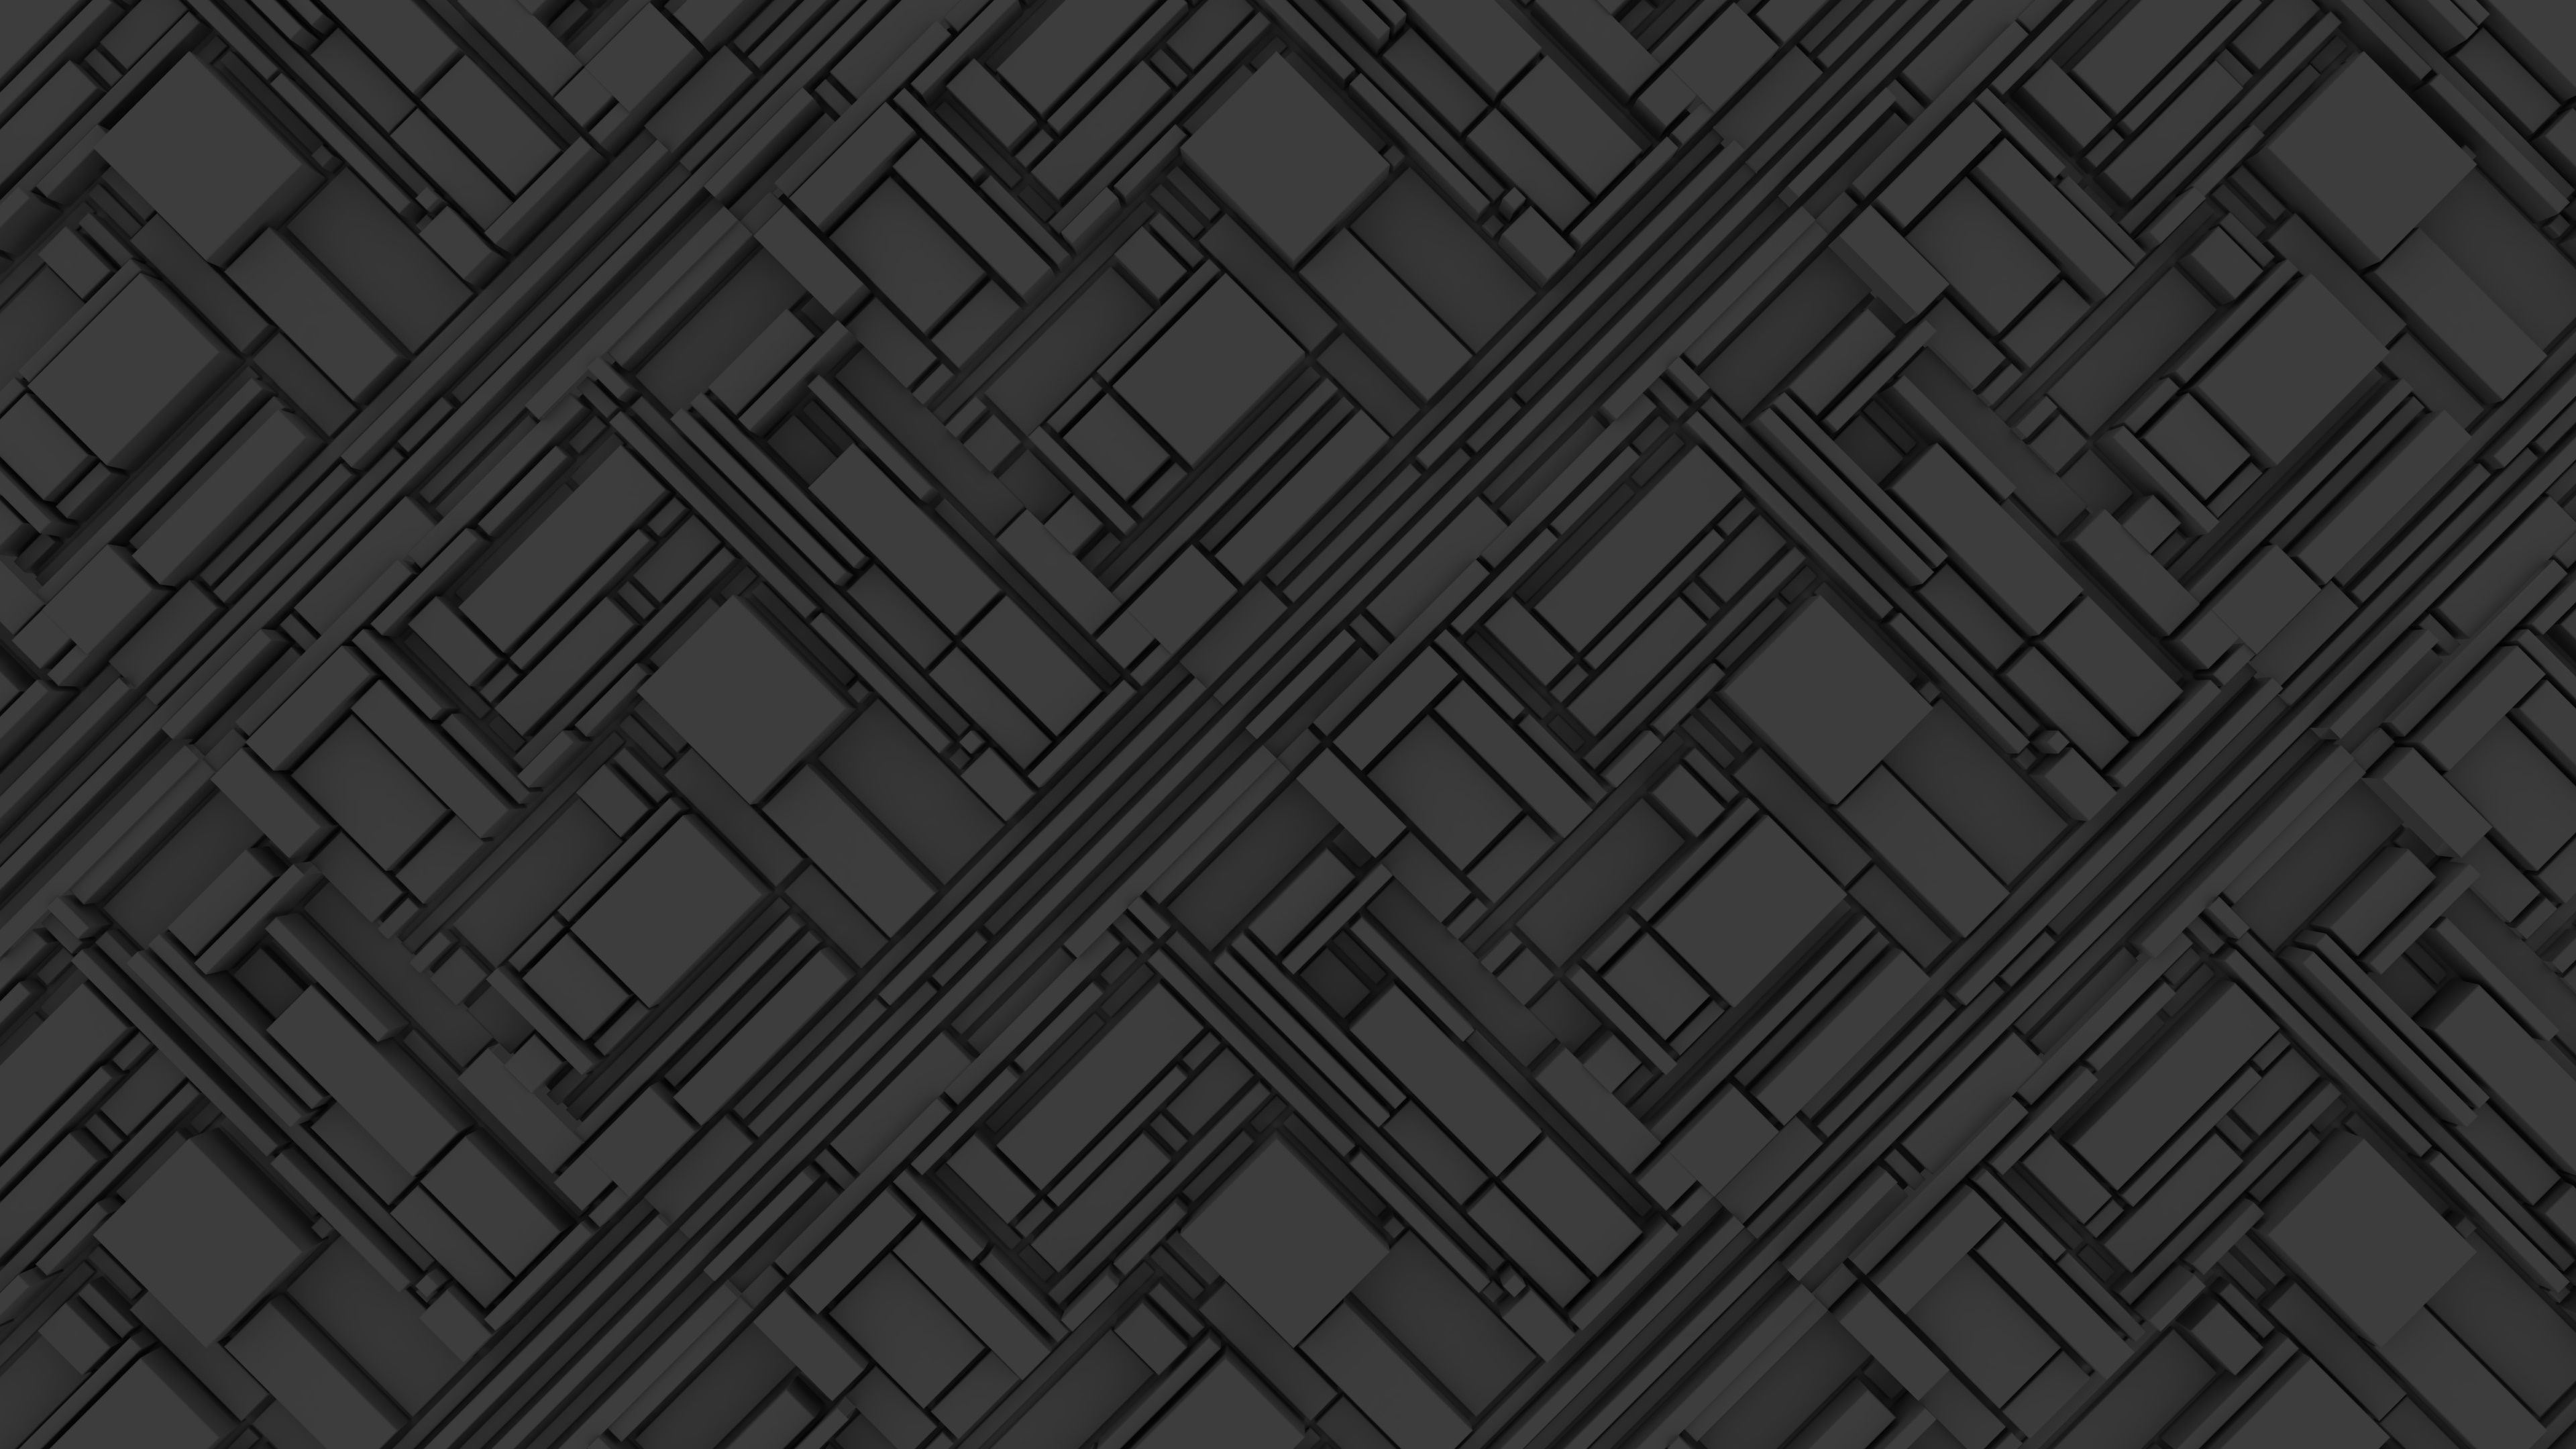 Dark Grey Abstract Wallpapers On Wallpaperdog All of the grey wallpapers bellow have a minimum hd resolution (or 1920x1080 for the tech guys) and are easily downloadable by clicking the image and saving it. dark grey abstract wallpapers on